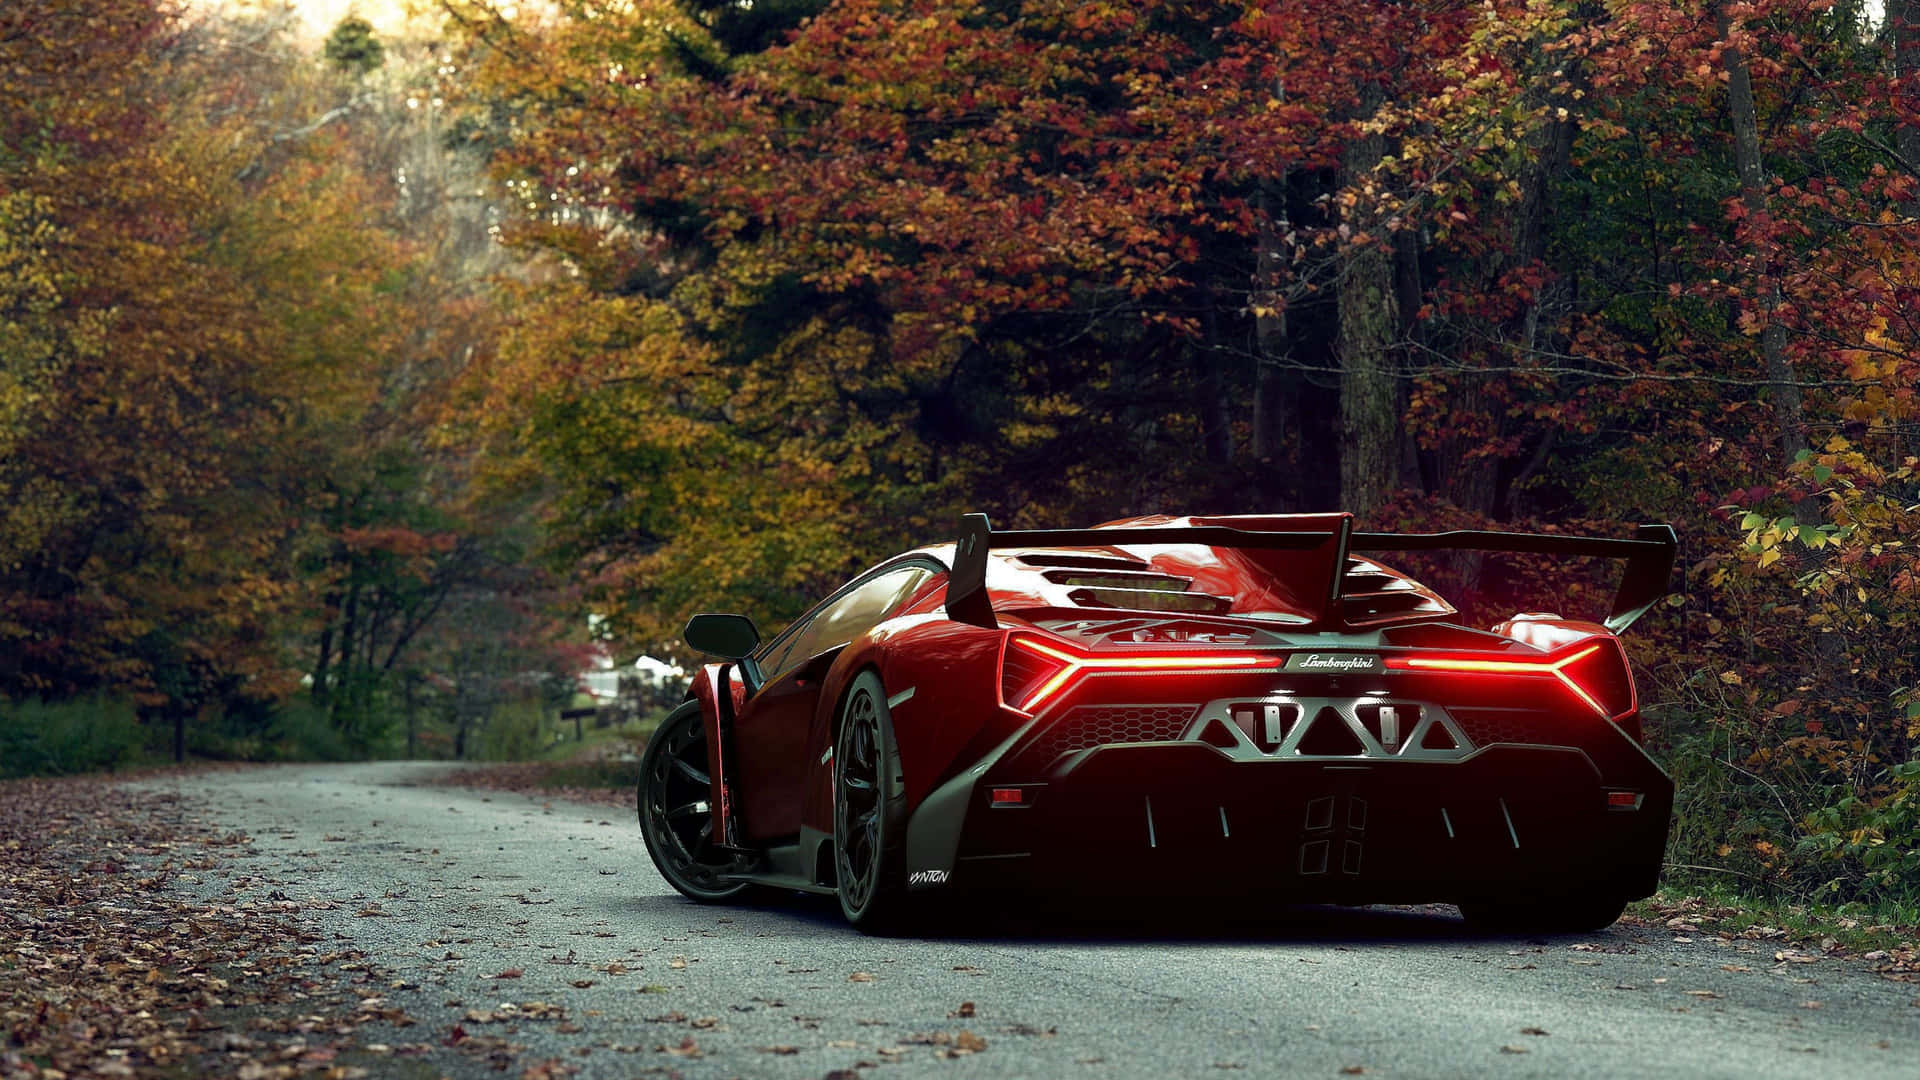 A Red Sports Car Driving Down A Road In The Fall